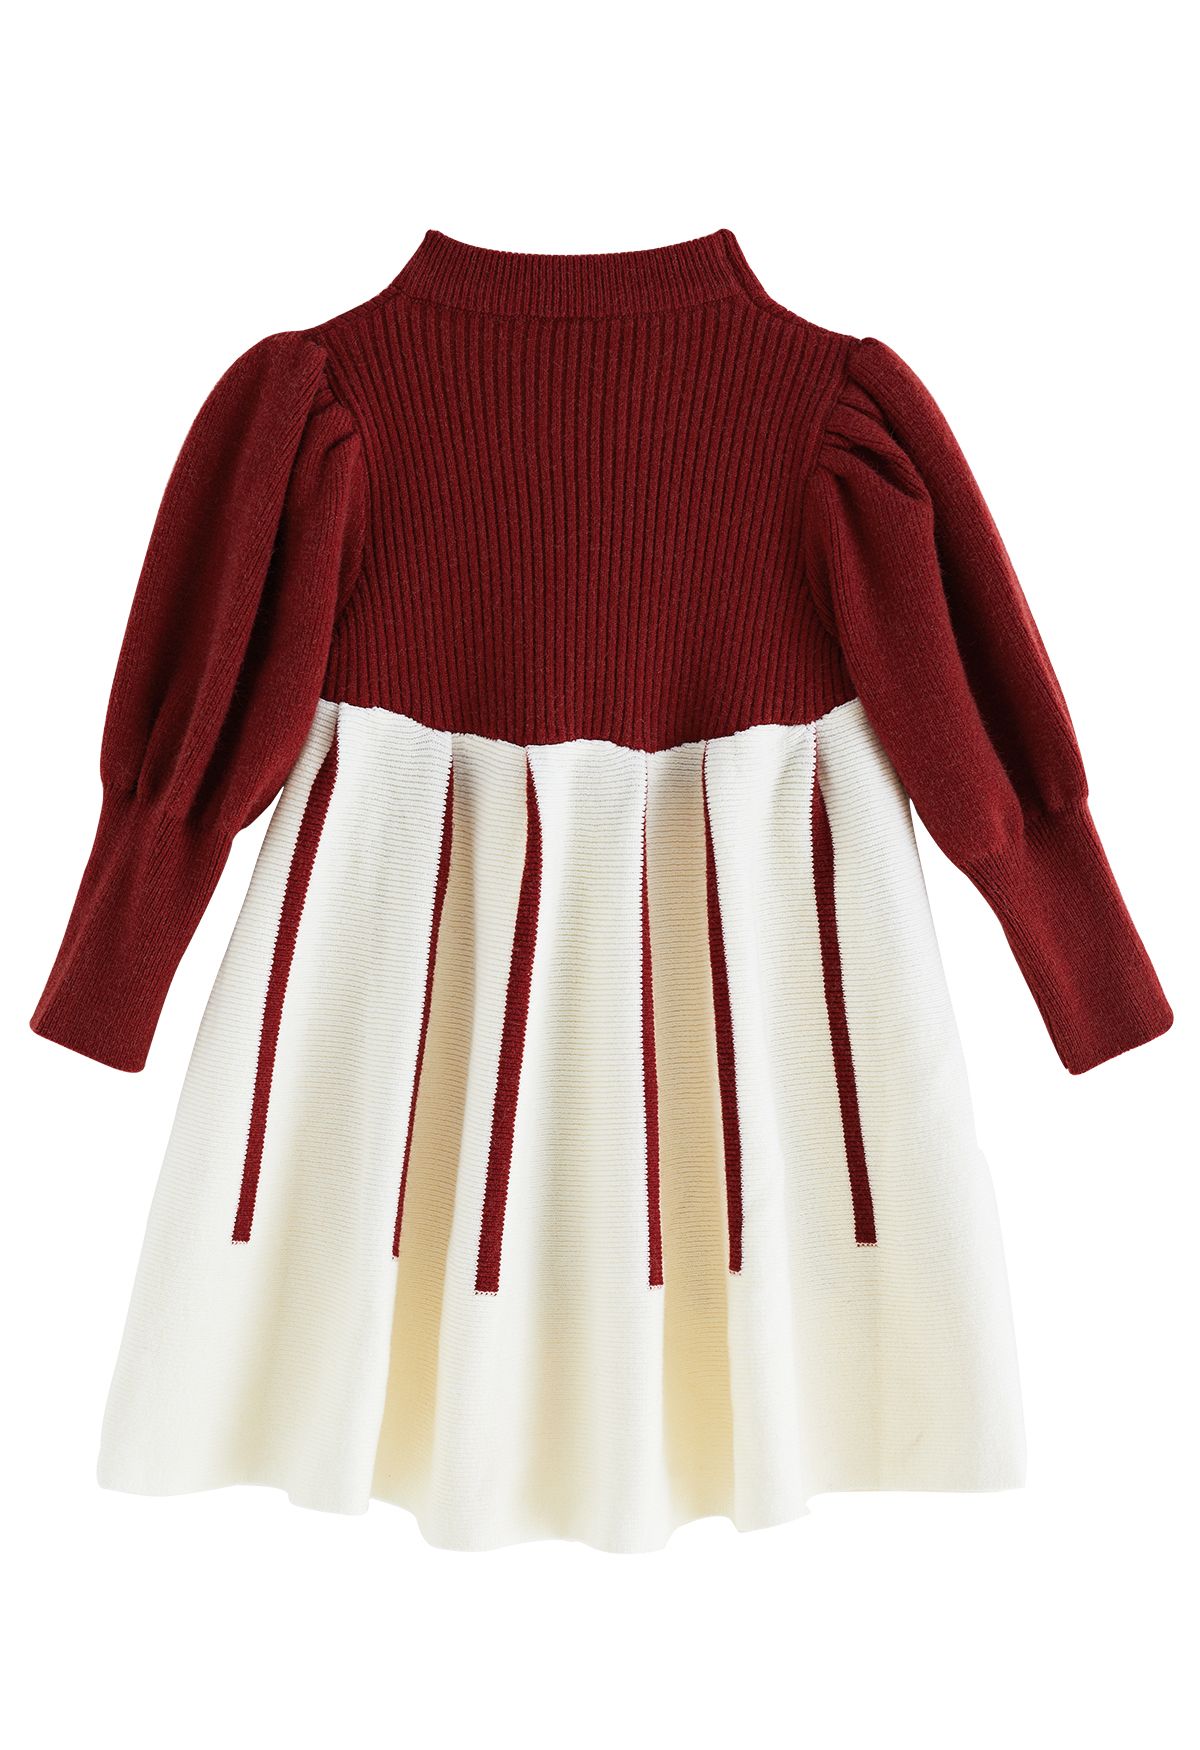 Sweet Red Bowknot Knit Dress For Kids